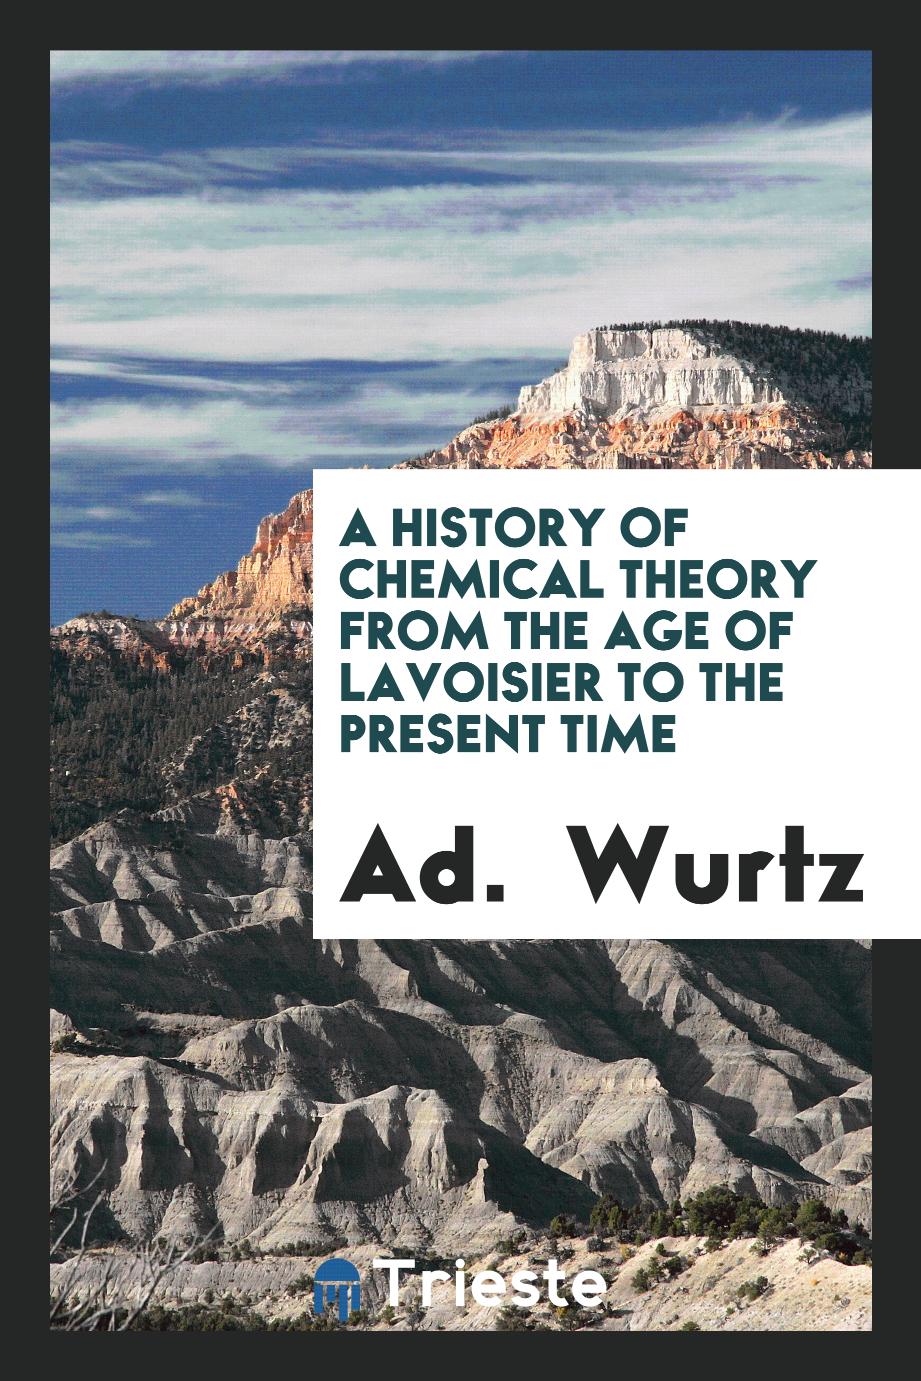 A History of Chemical Theory from the Age of Lavoisier to the Present Time